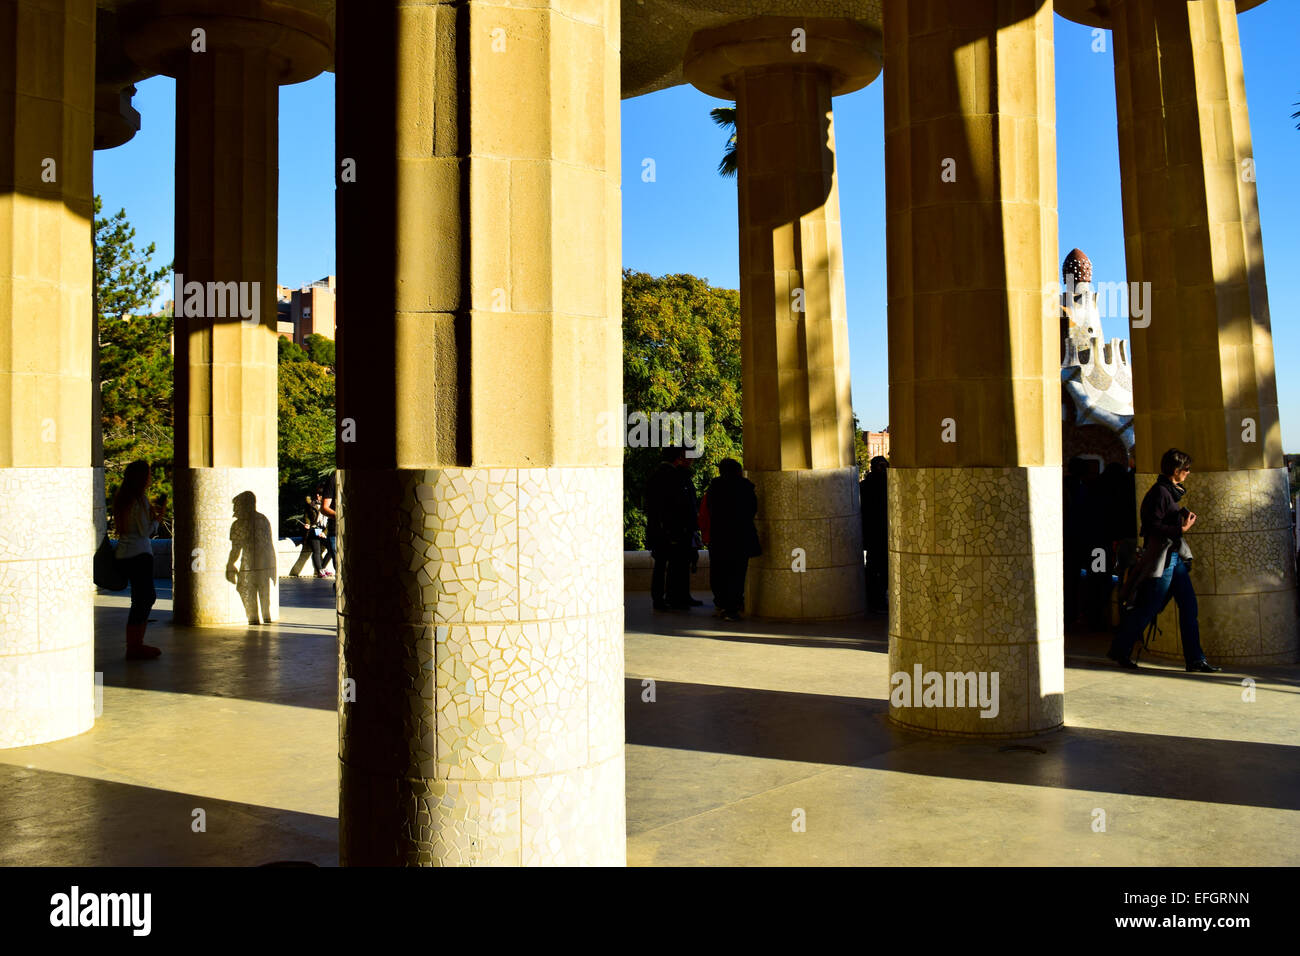 Park Guell by Antoni Gaudi architect. Doric columns supporting the terrace. Barcelona, Catalonia, Spain Stock Photo